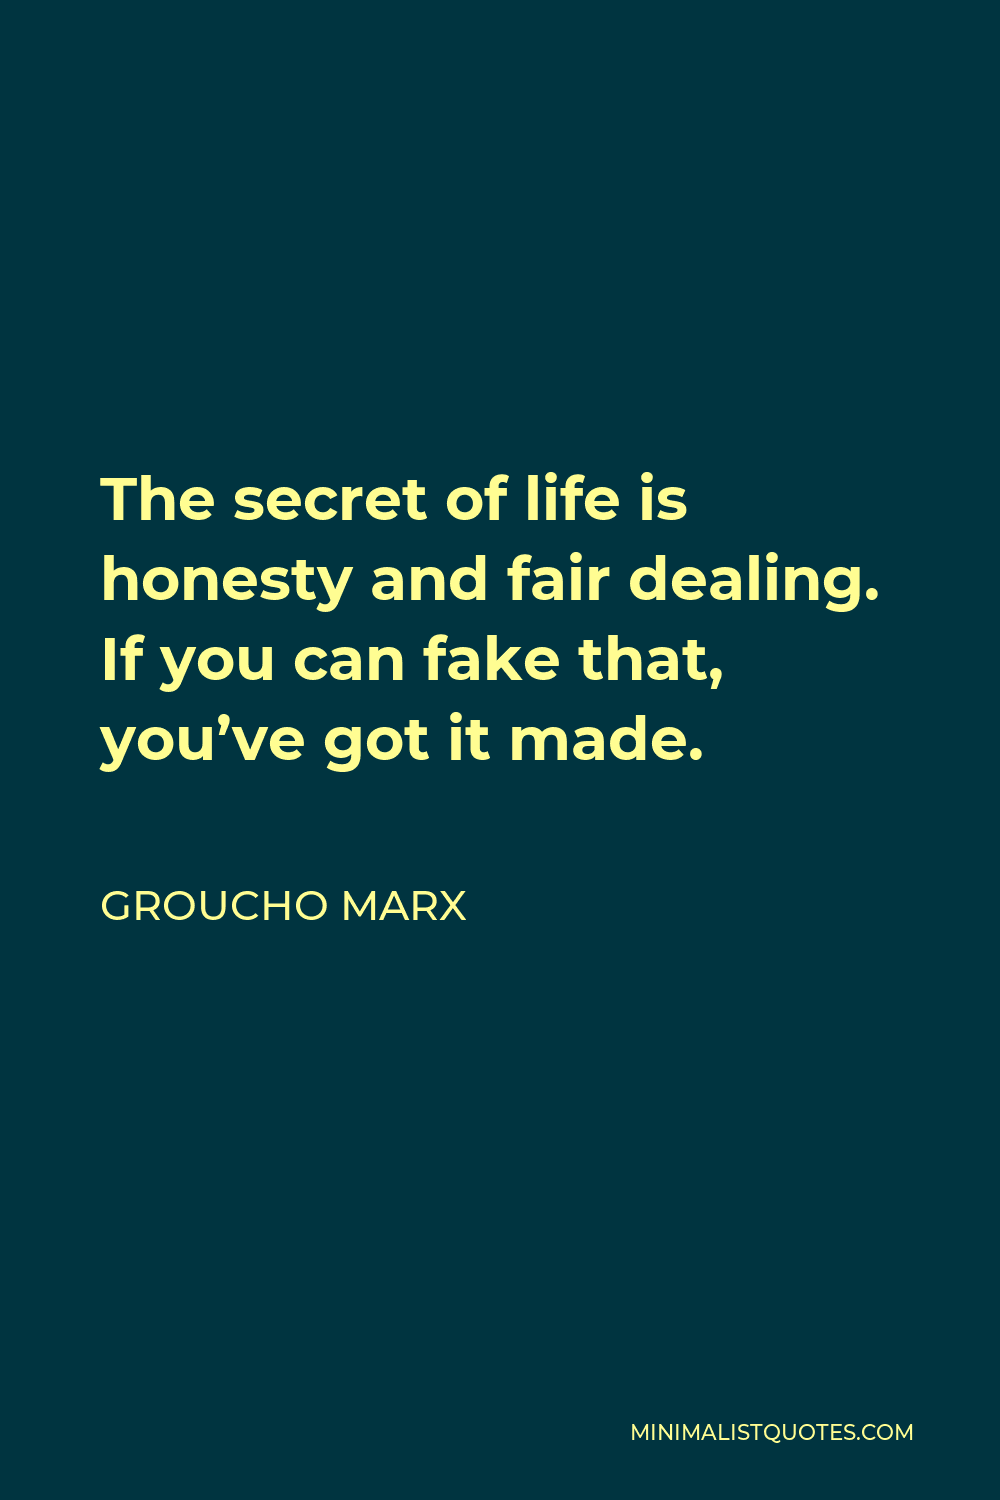 Groucho Marx Quote - The secret of life is honesty and fair dealing. If you can fake that, you’ve got it made.